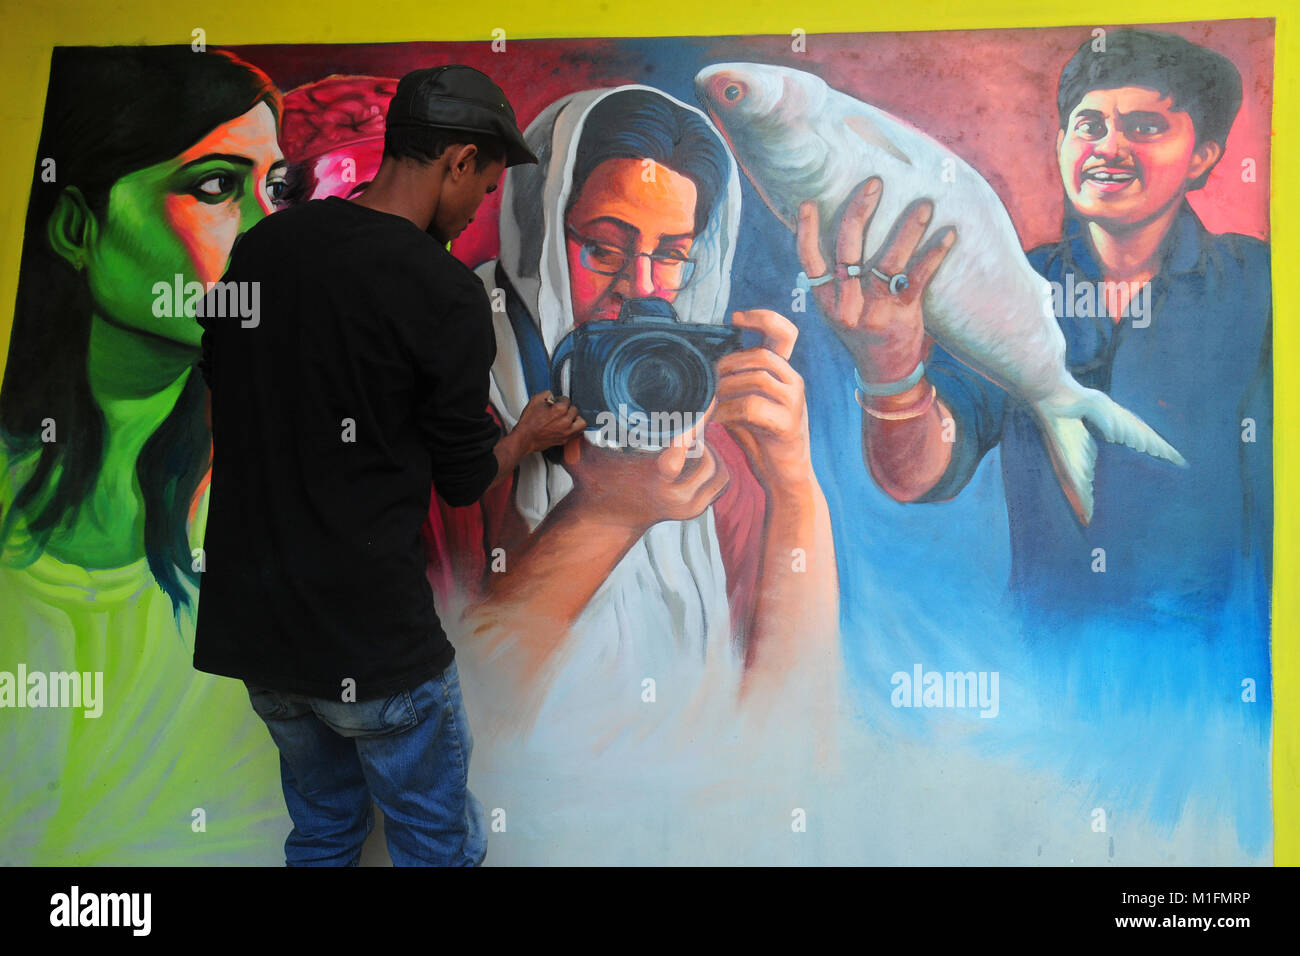 Bangladeshi artist drawing film banner at Old Town in Dhaka City, Bangladesh, on January 30, 2018. Film banner painting is one of the extinct arts works in Bangladesh. Stock Photo